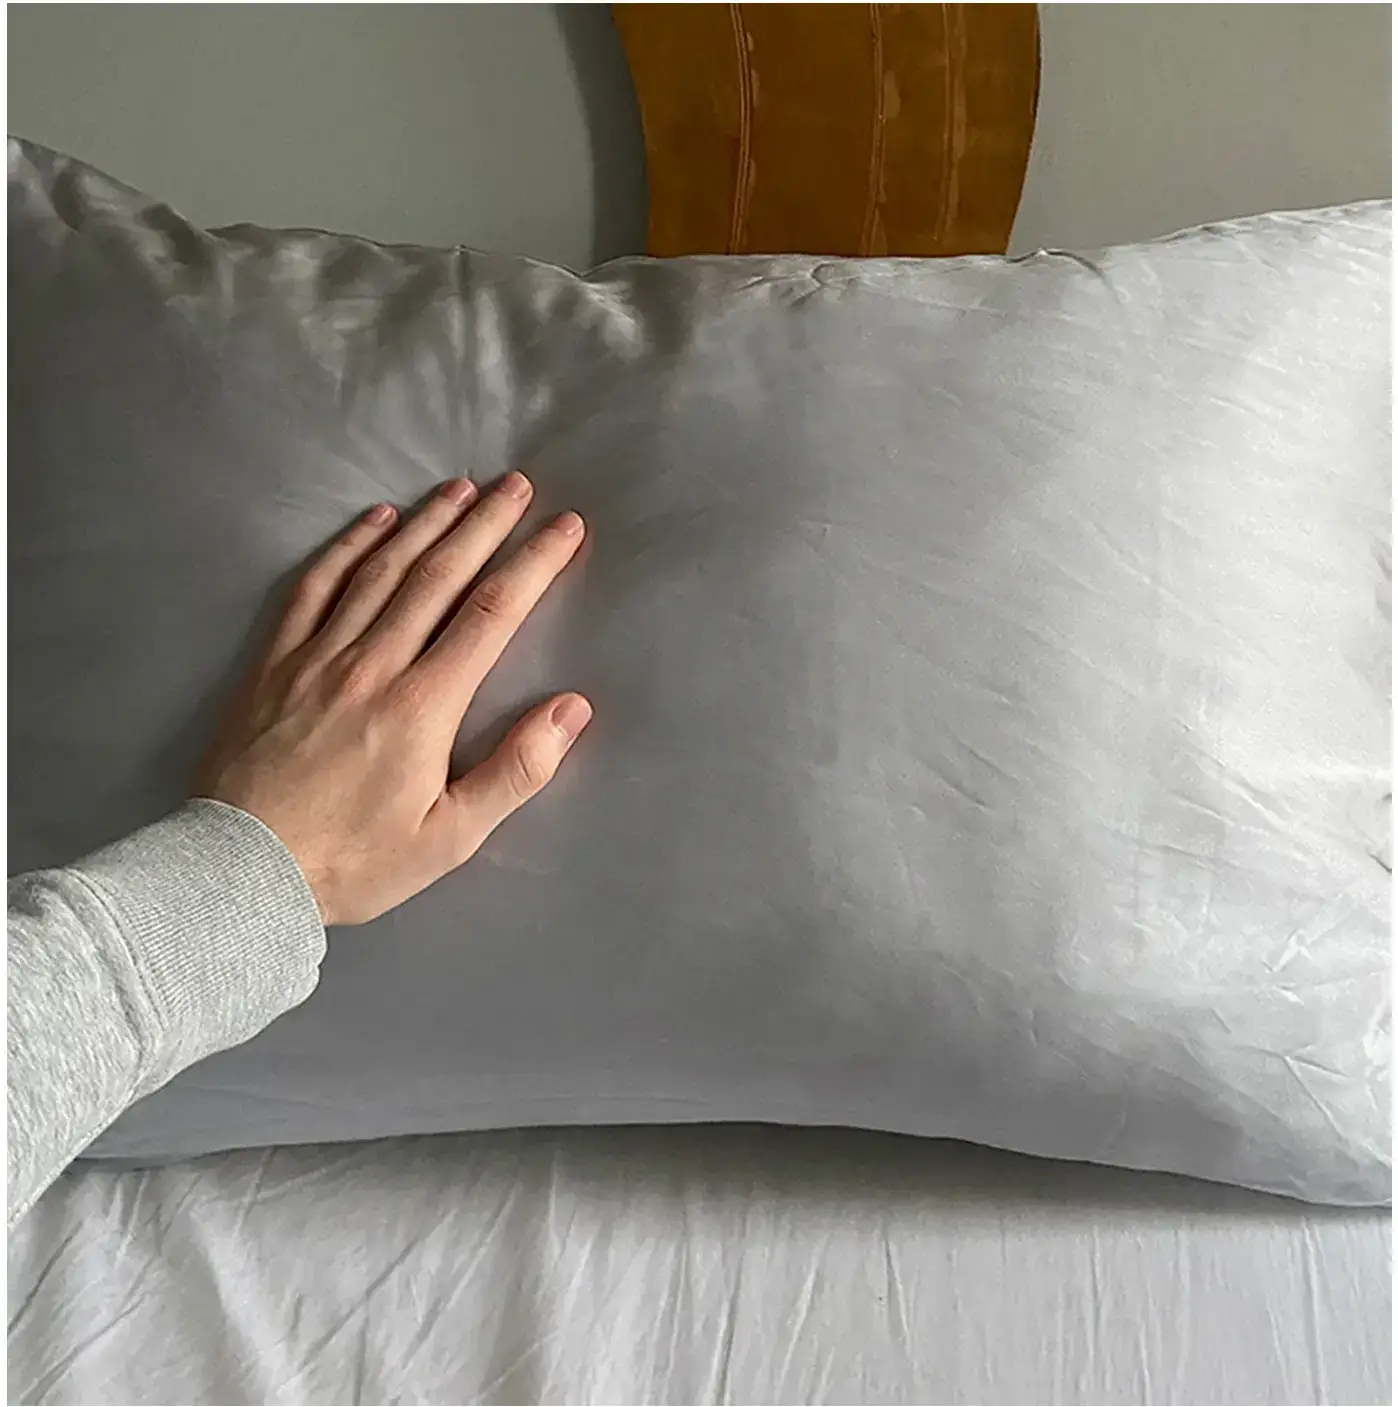 Hand pressing on a pillow, testing its softness.